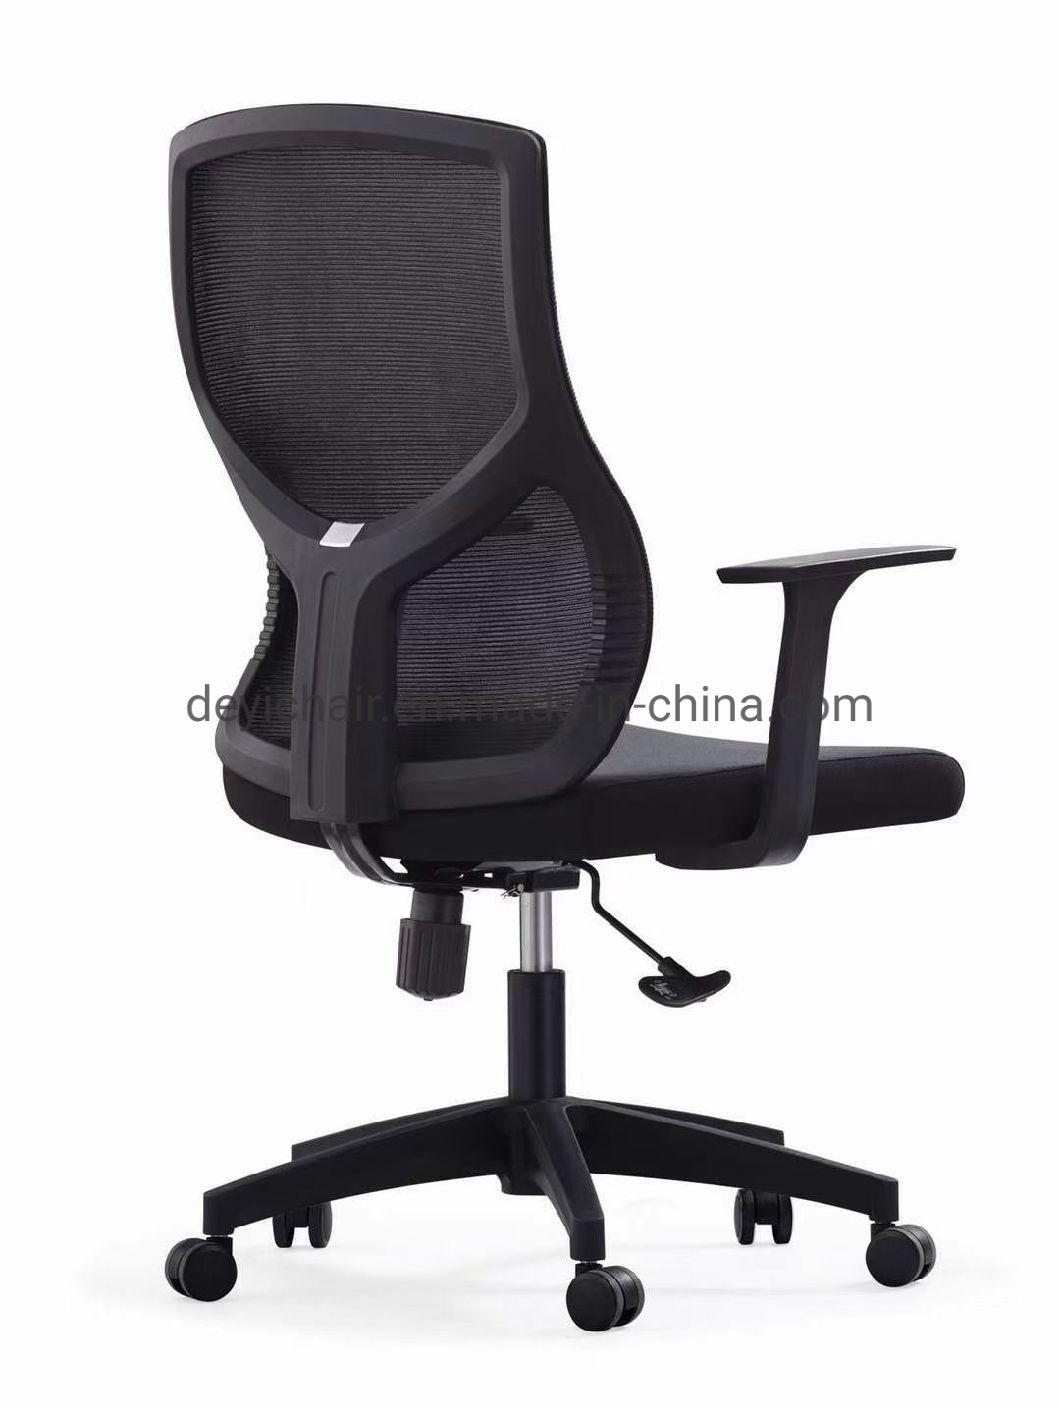 Tilting Mechanism with PU Height Adjustable Arms Mesh Back Fabric Cushion Seat Nylon Base High Back with Fabric Cushion Headrest Office Chair